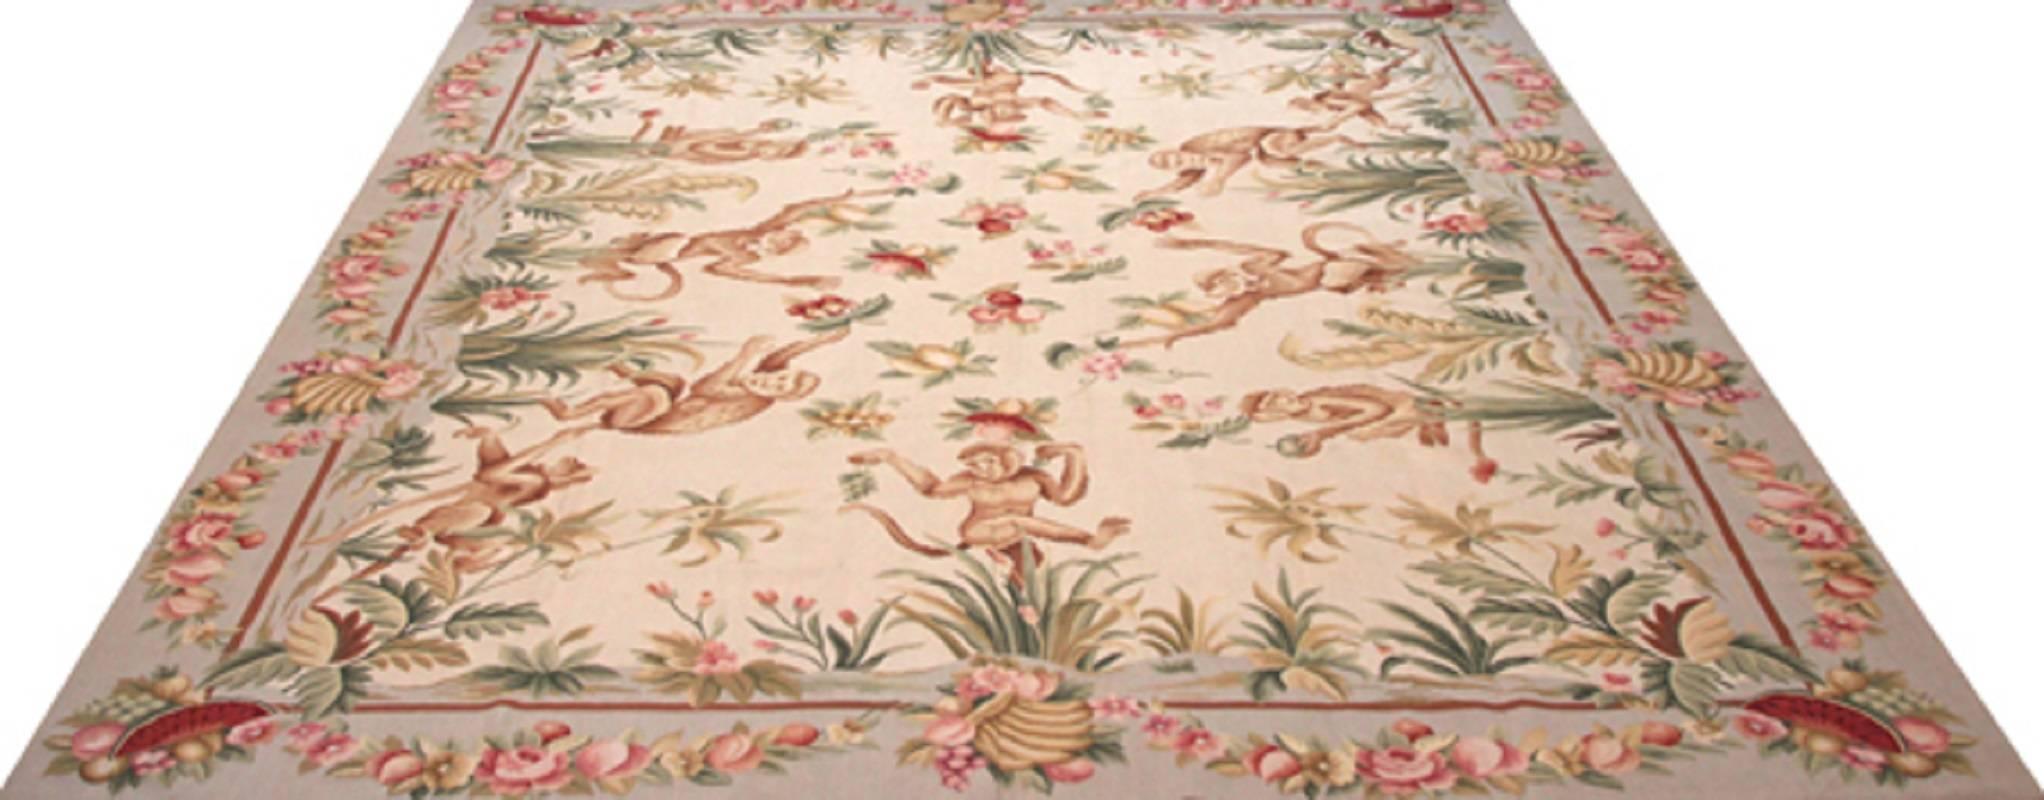 Chinese Handwoven French Aubusson with Monkey Motif  For Sale